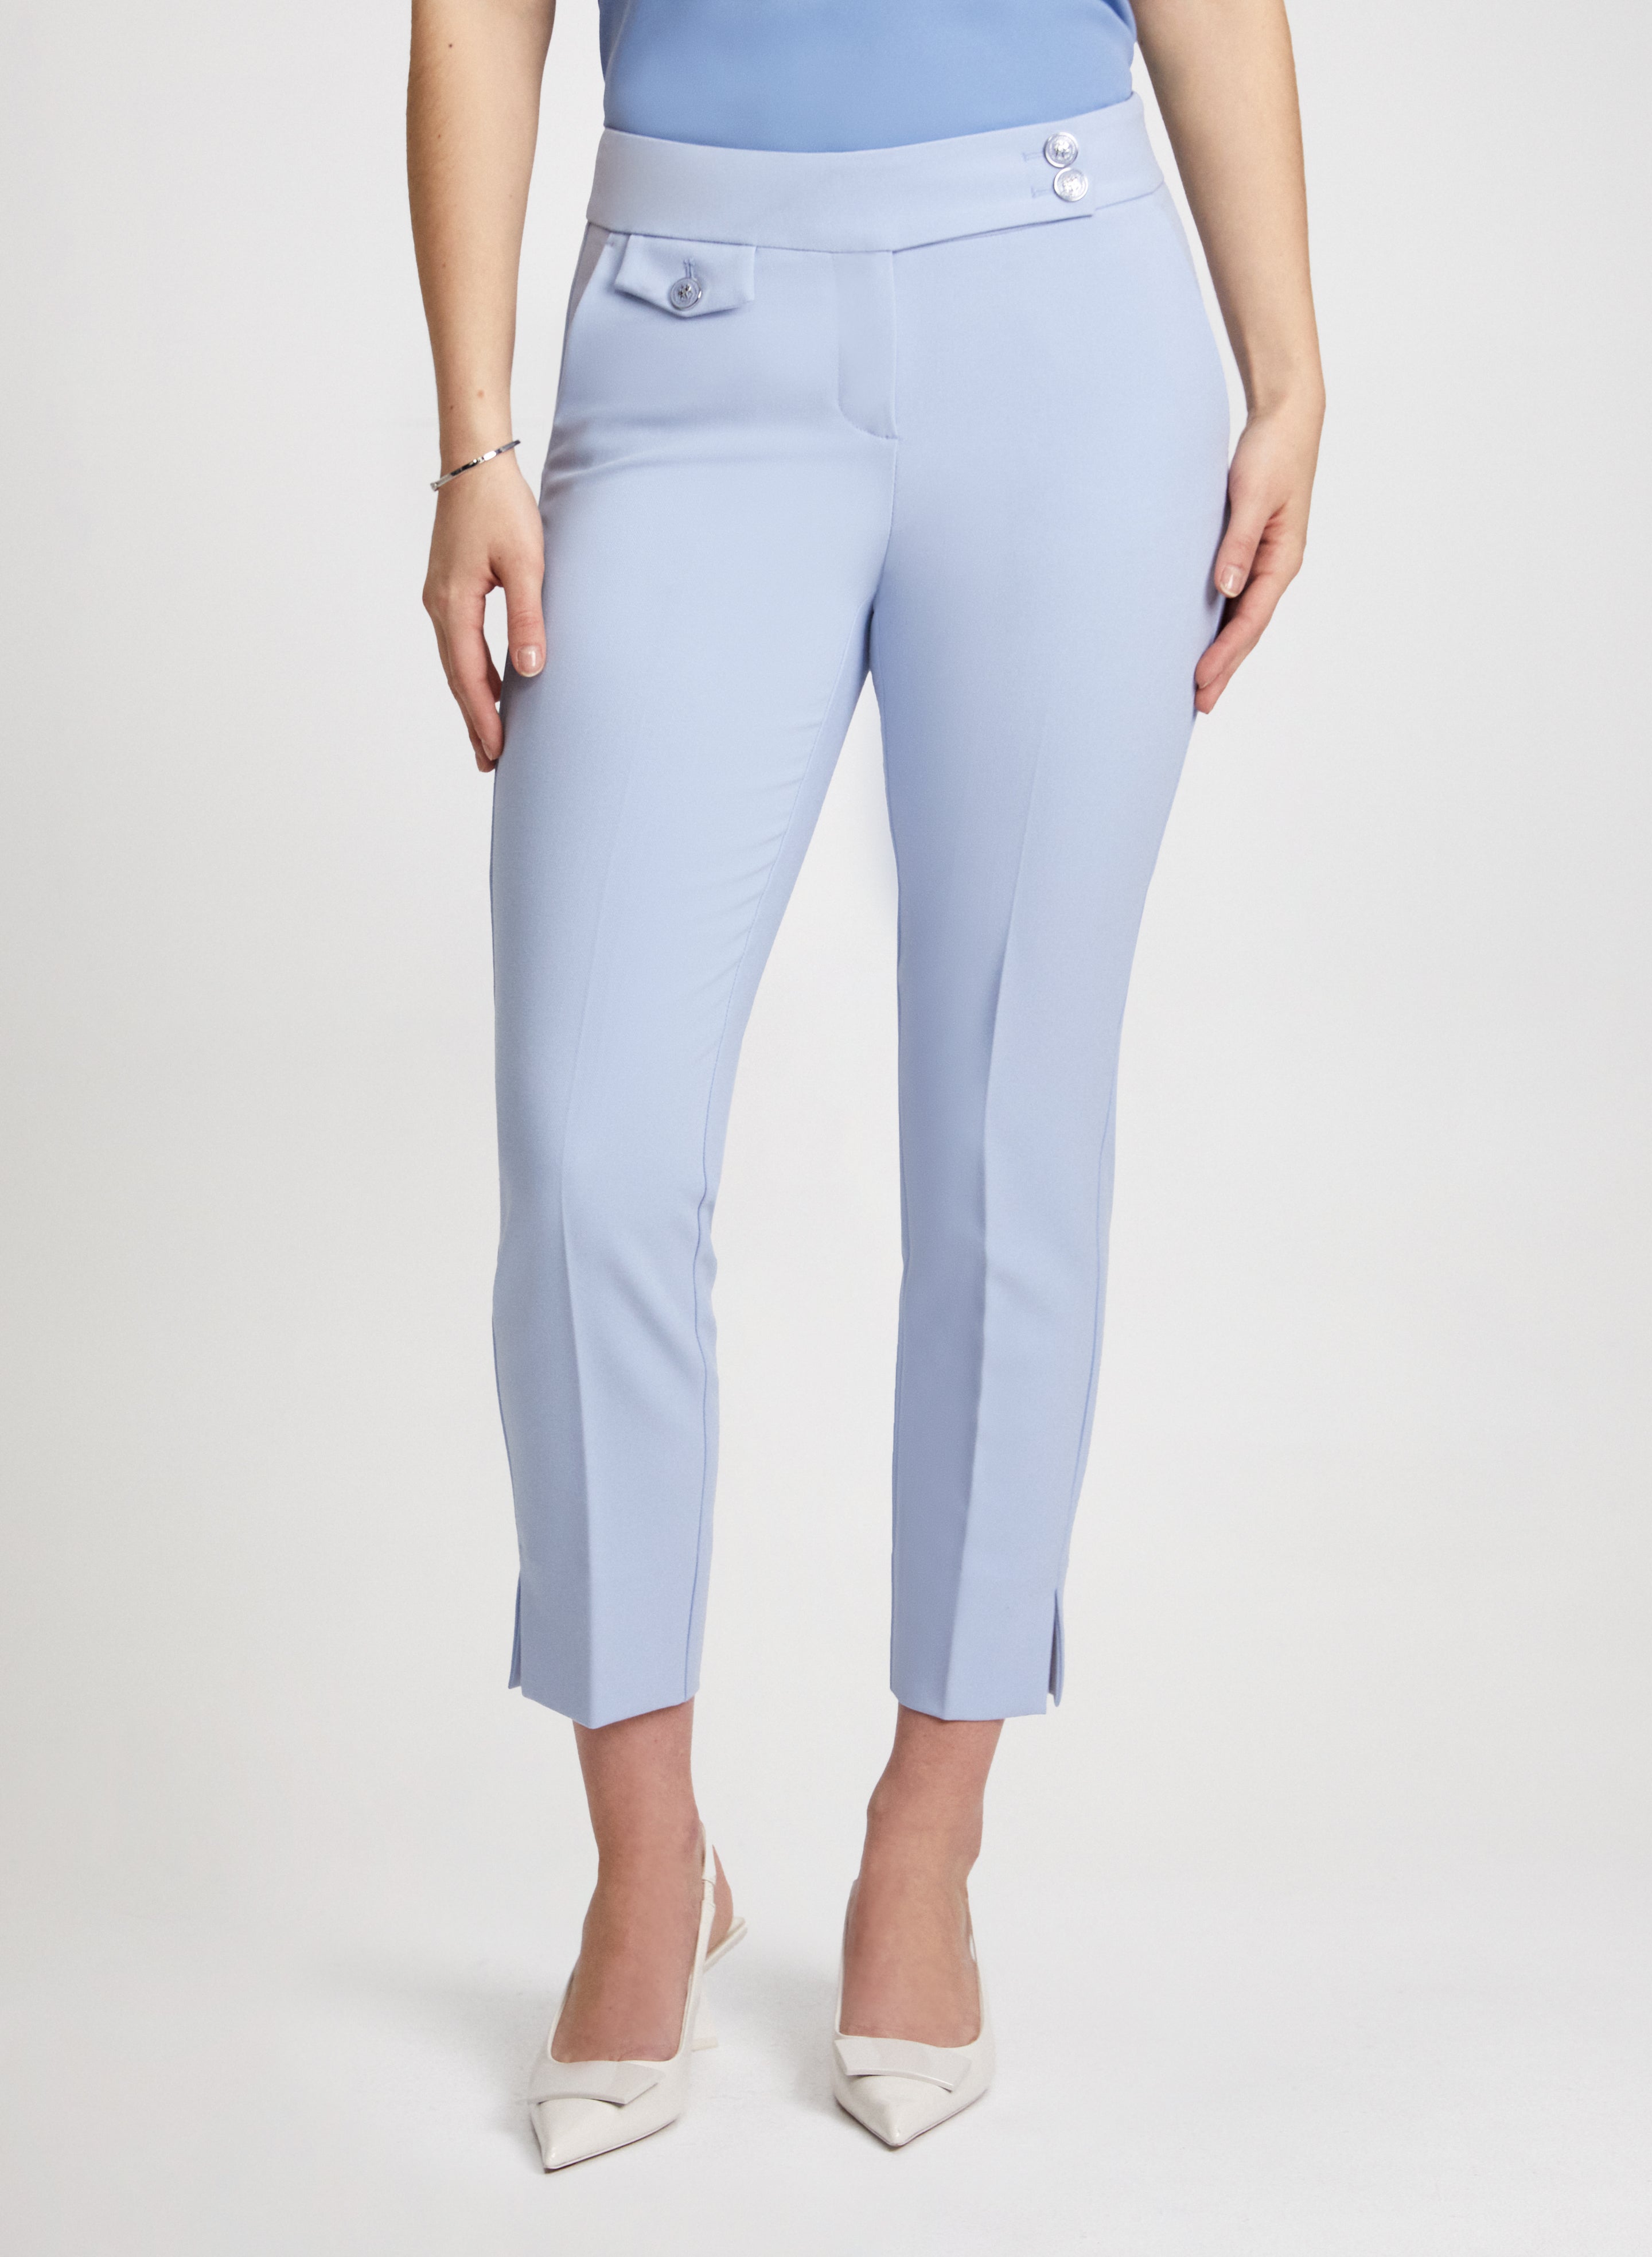 Women's Ankle Length Trousers